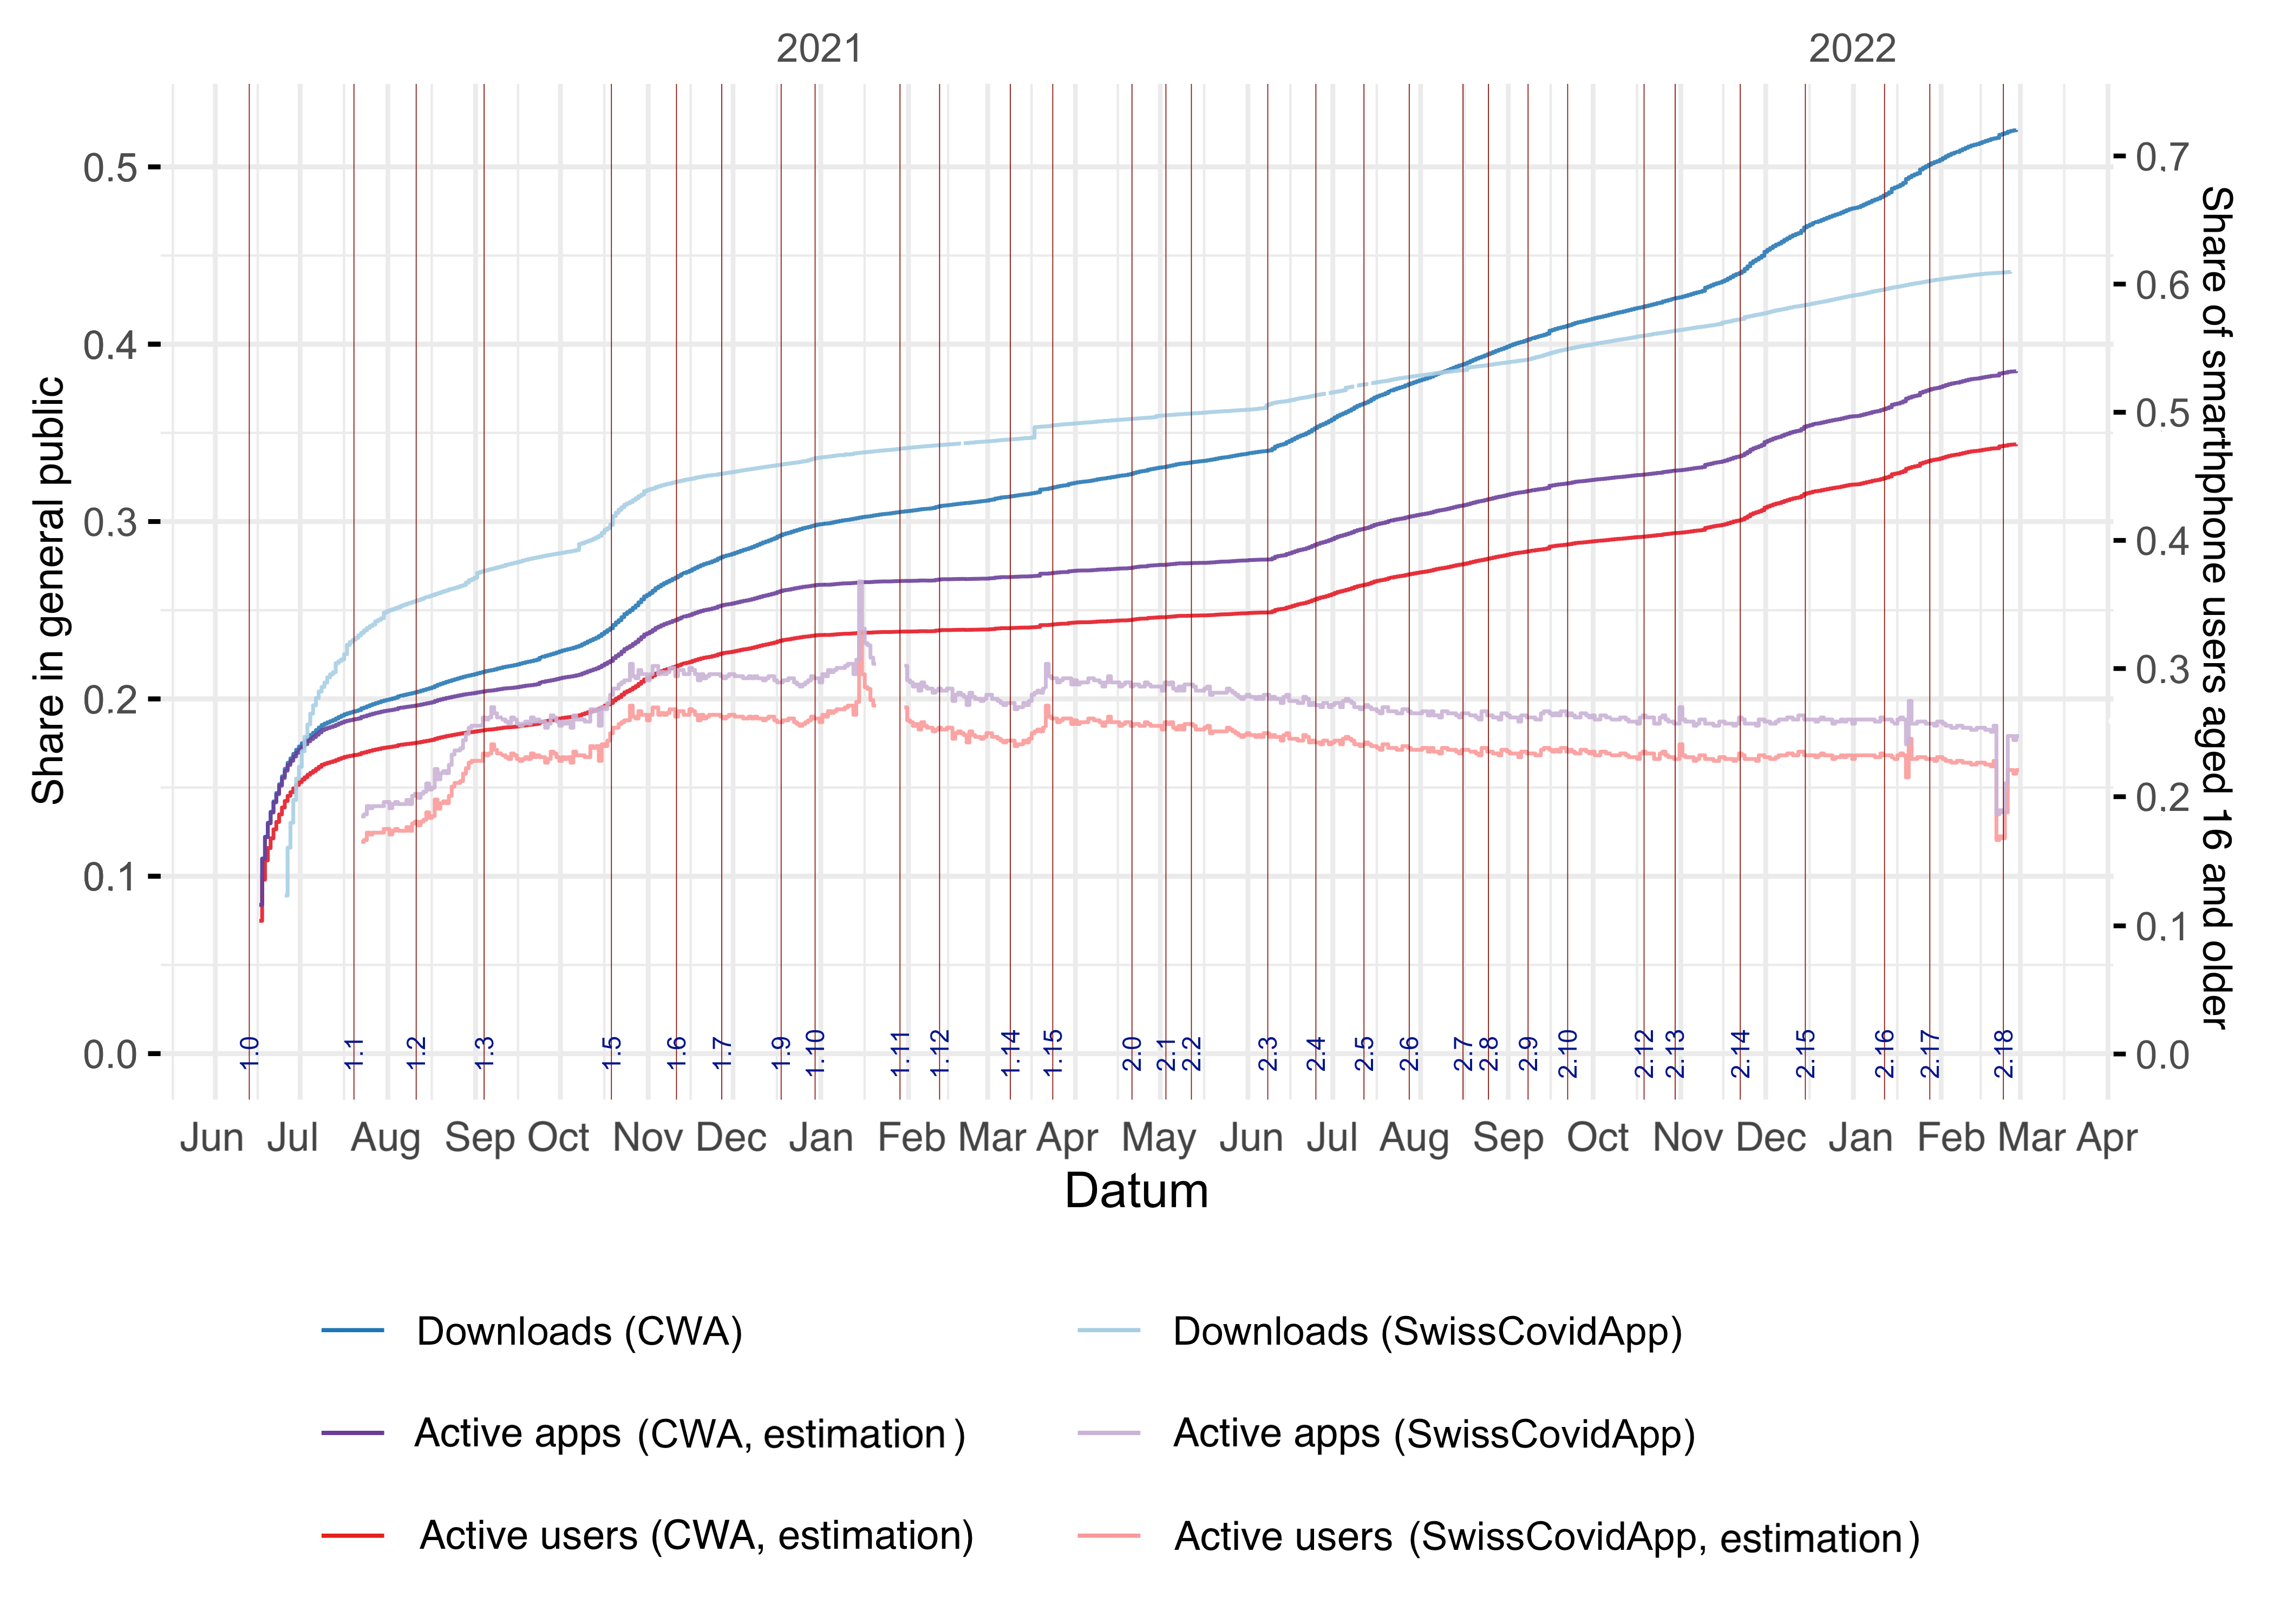 Comparison of download numbers and active users or active apps, respectively, for Corona-Warn-App, and SwissCovidApp.